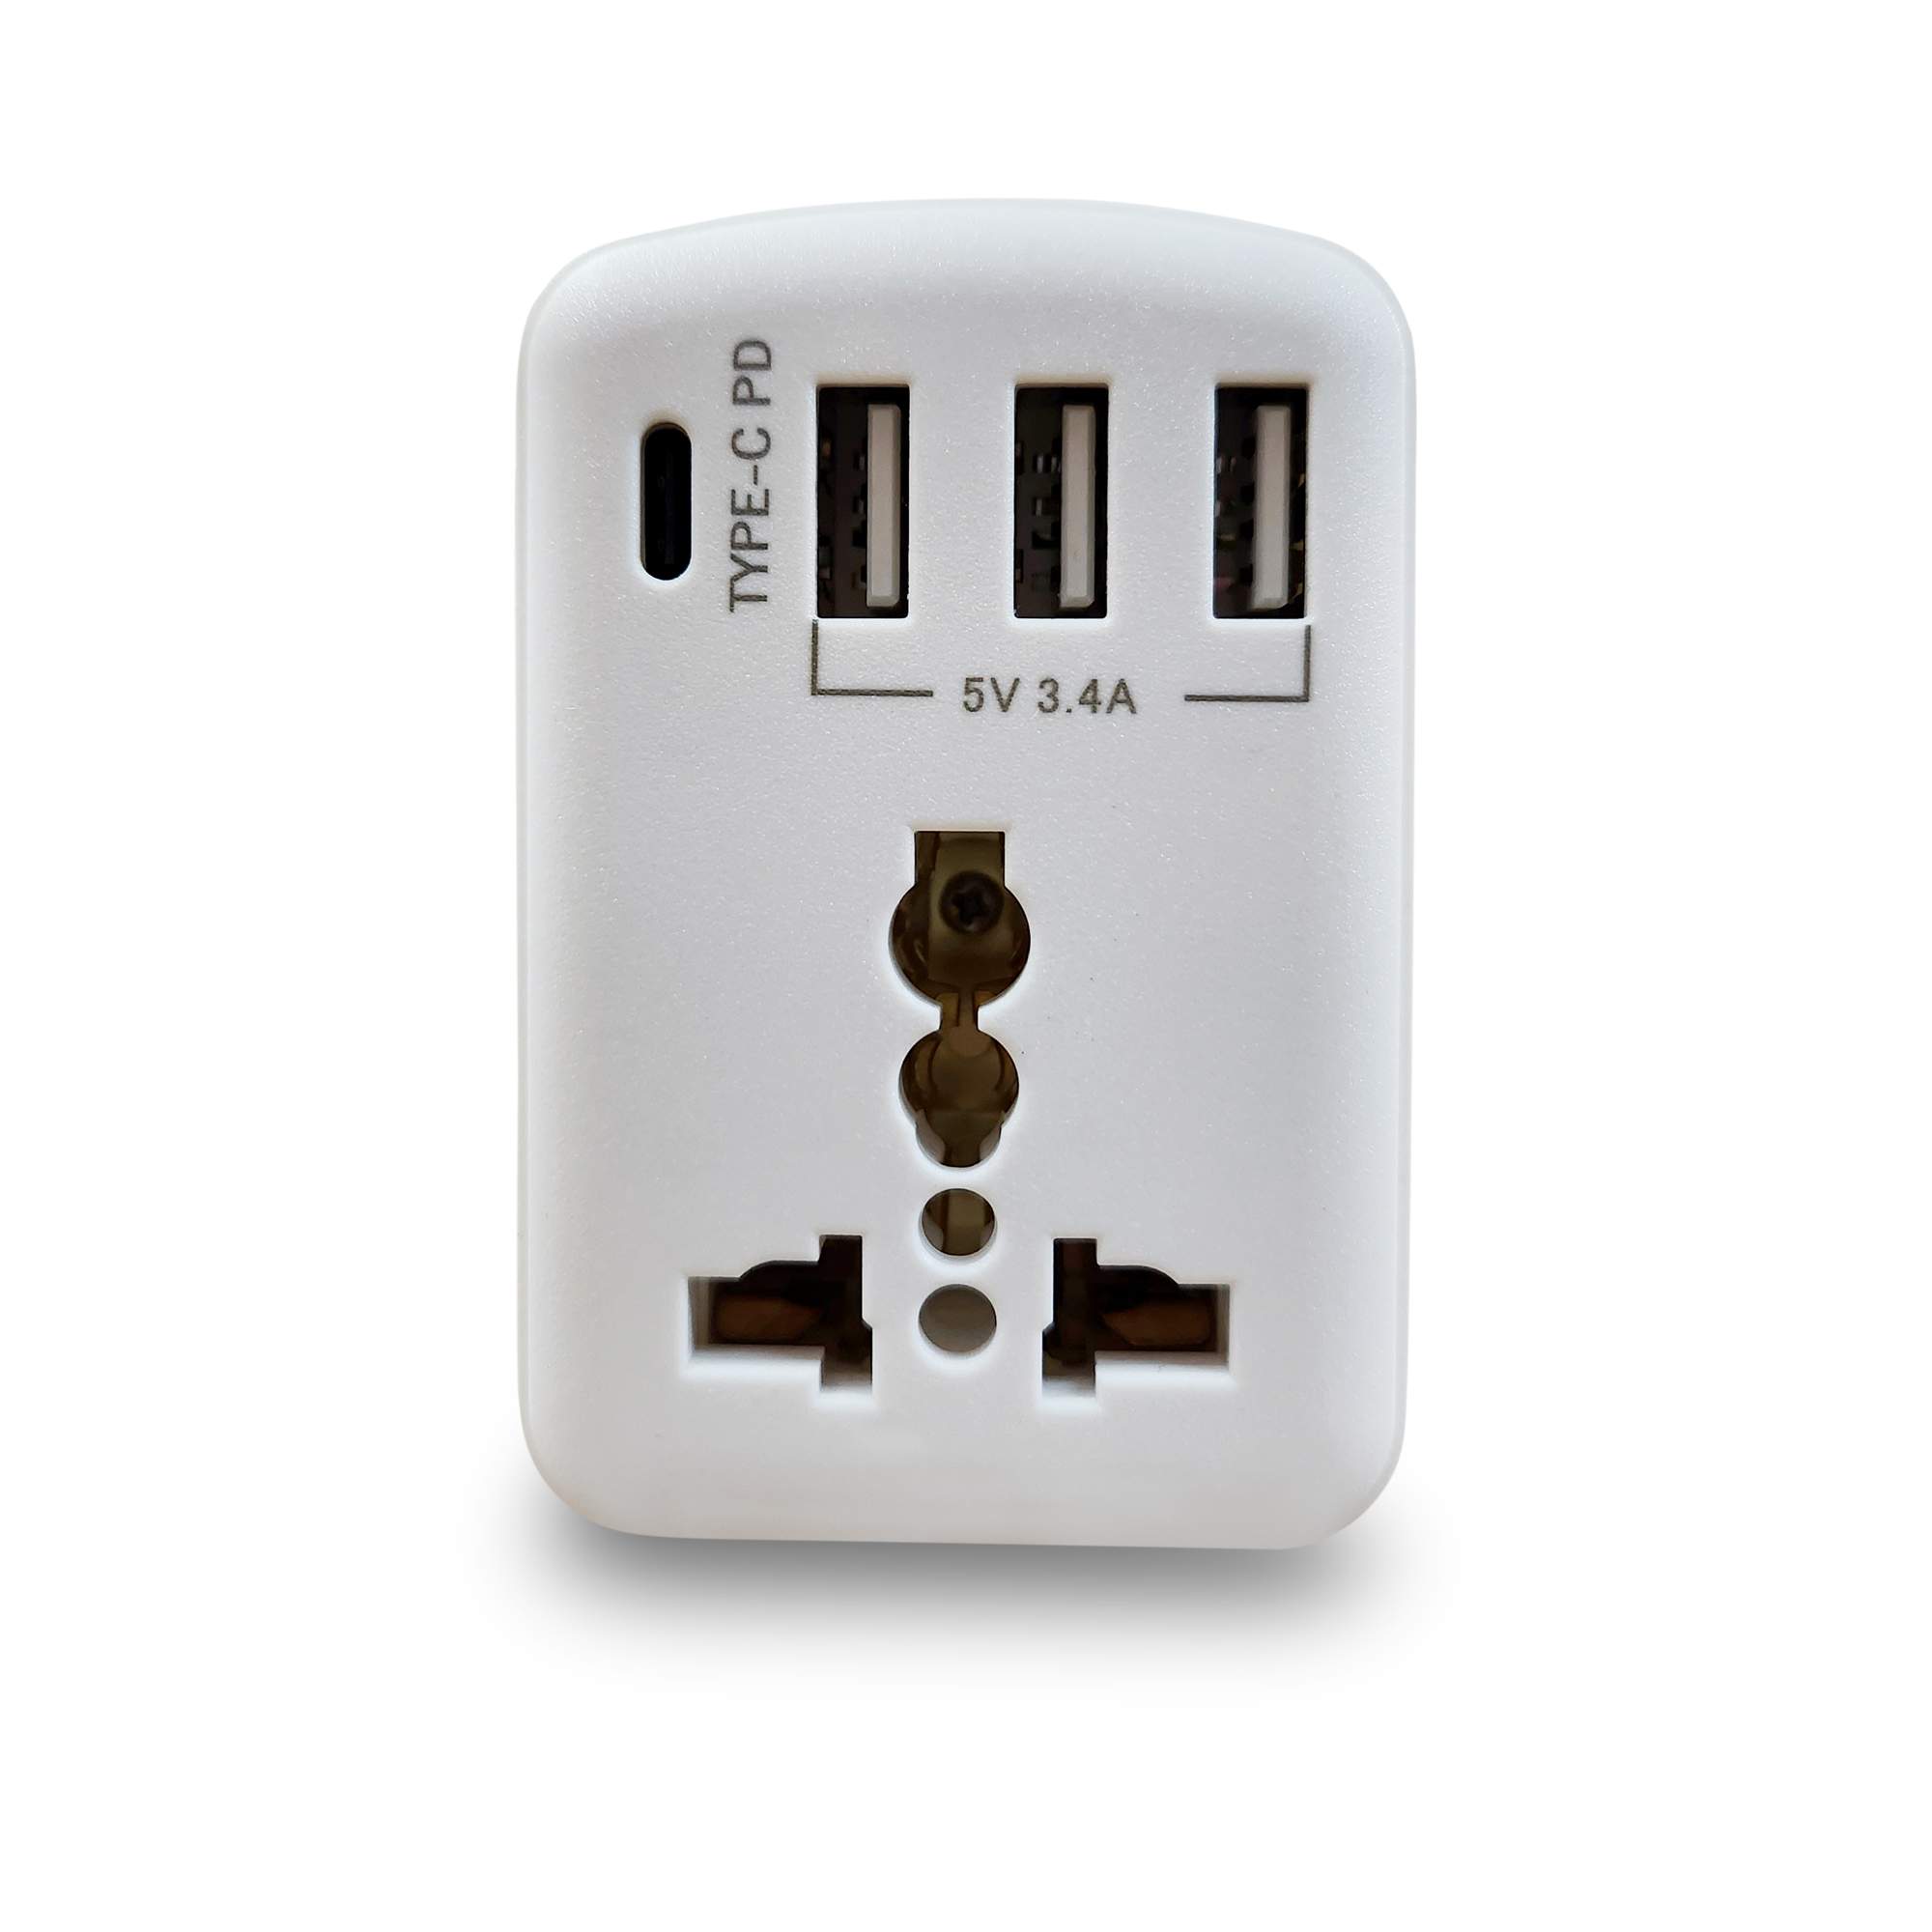 MX Worldwide Universal Socket Travel Adapter with Type-C PD (5V/3A) & Triple USB Ports (5V 3.4A Smart Charging Ports) -5 in One, AC Plug ? Universal Conversion Plug (White, MX-4211)